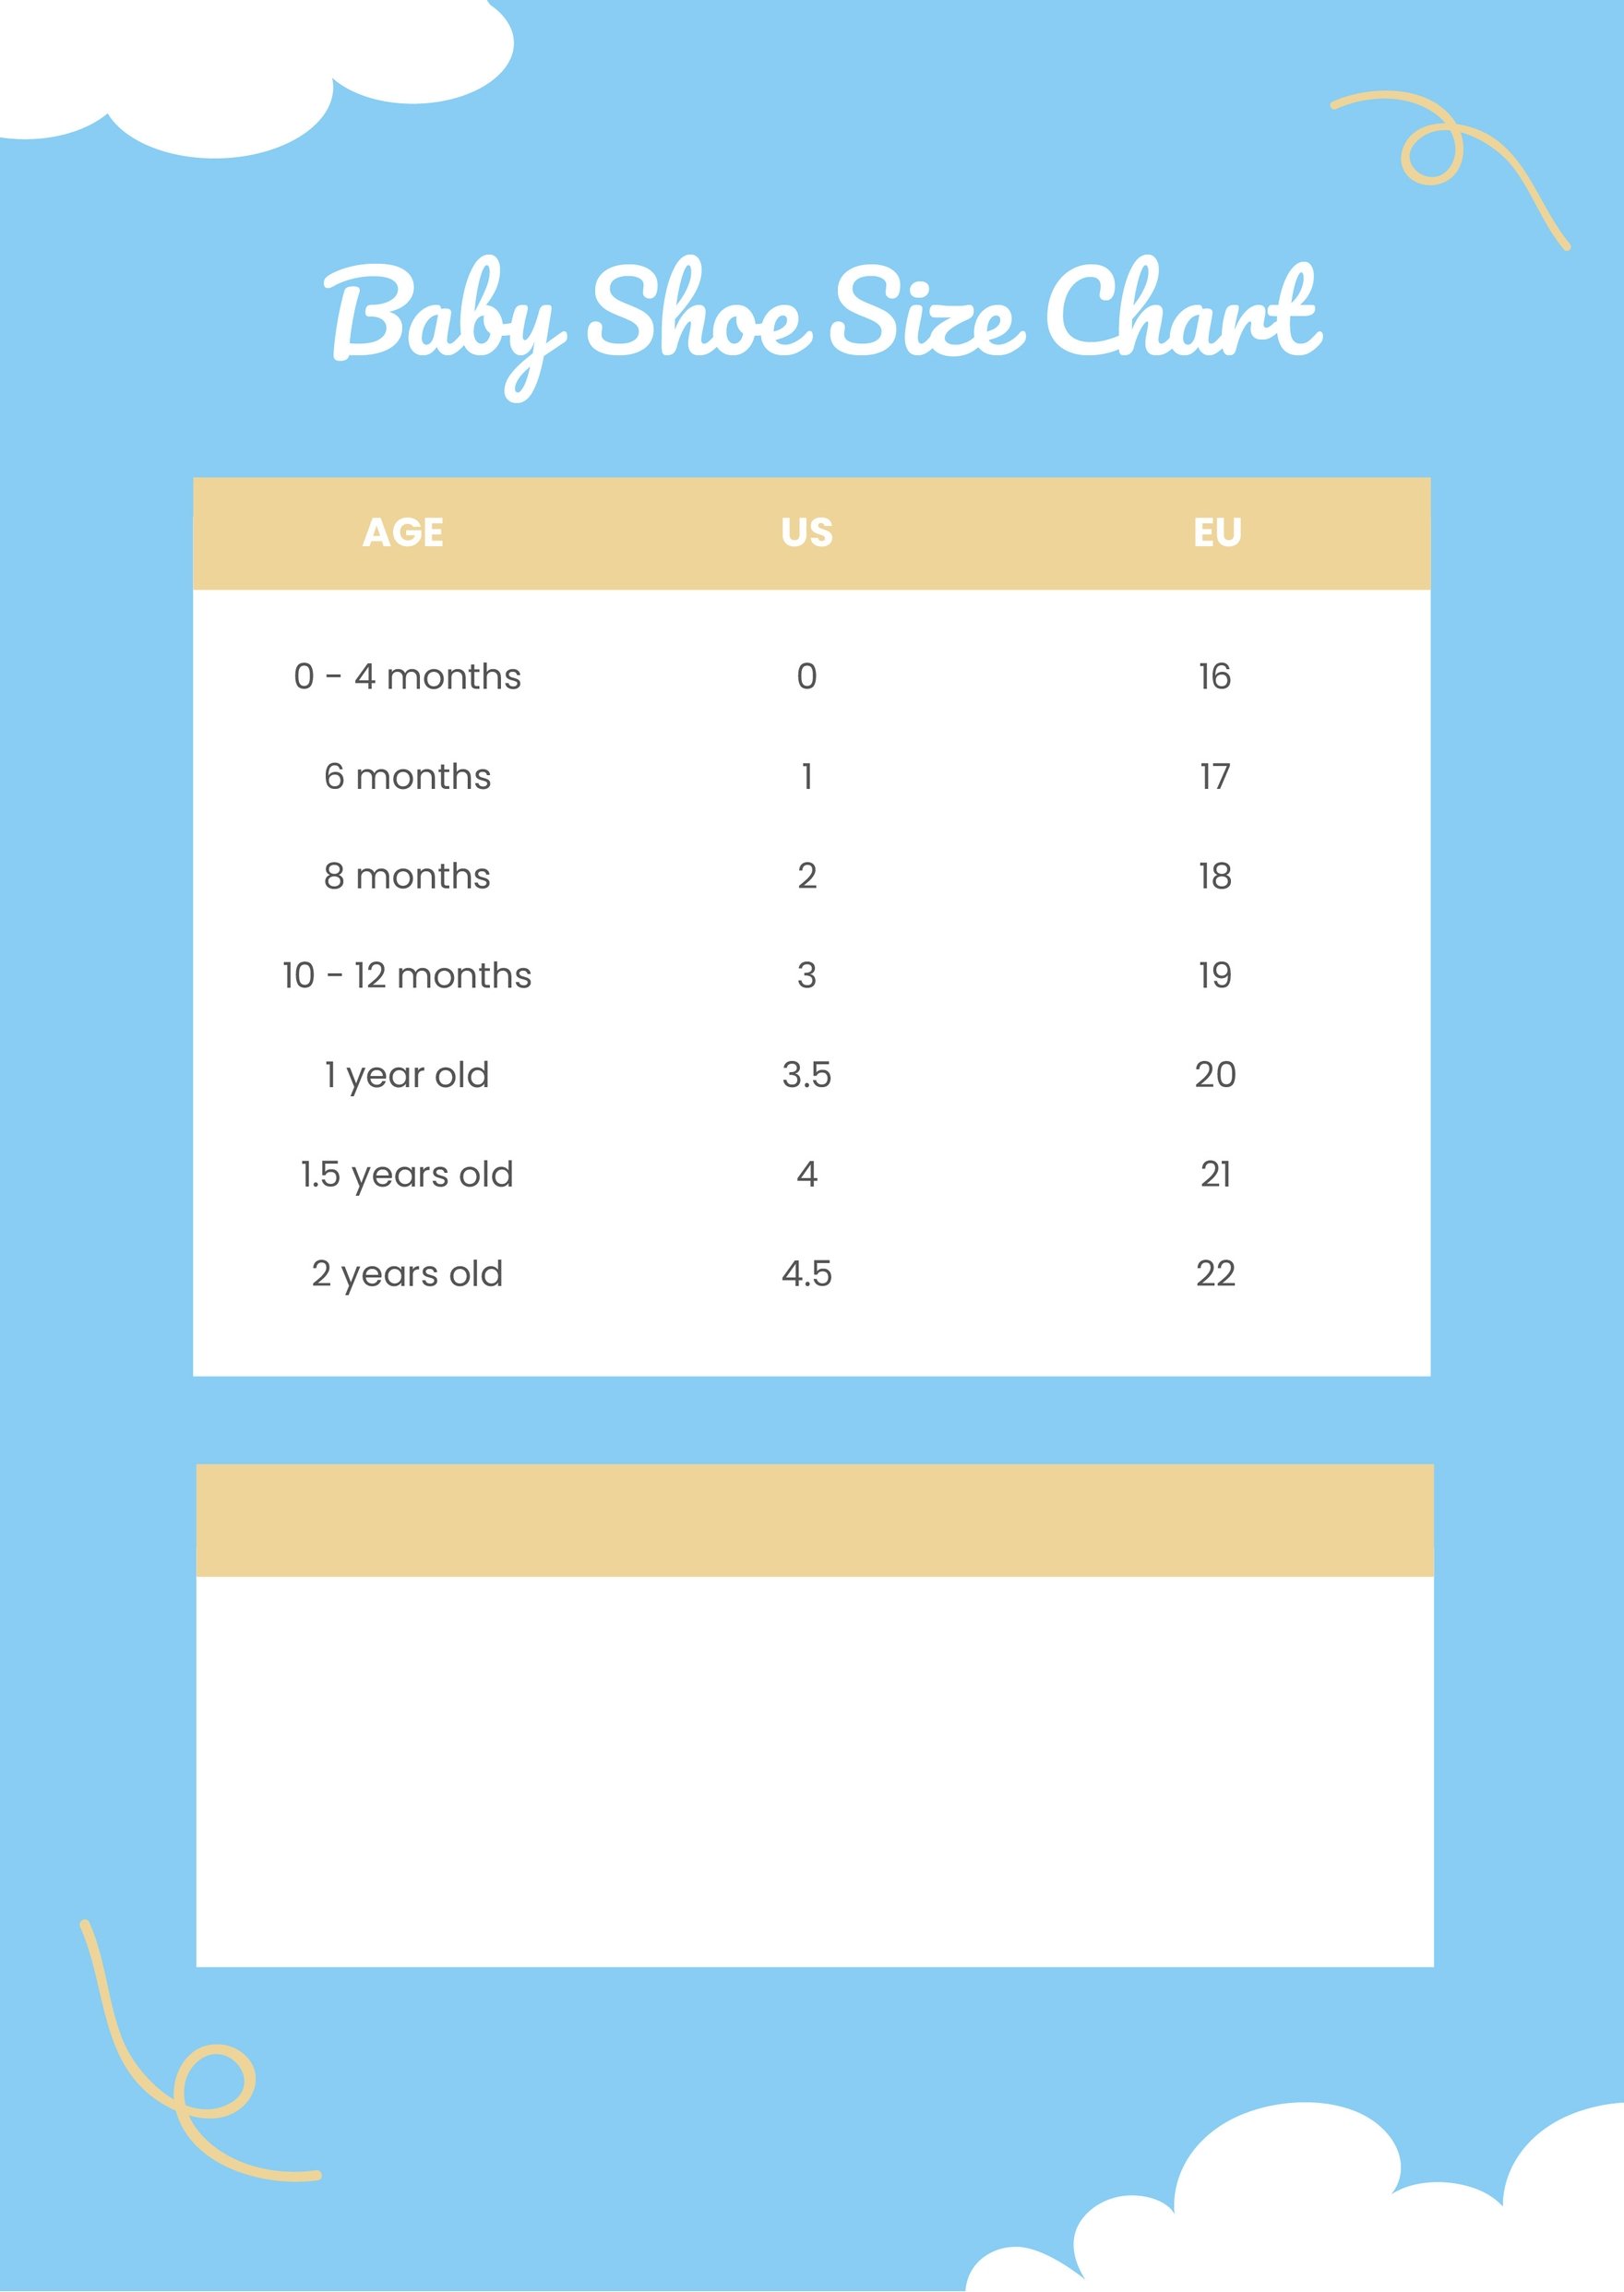 Free Baby Shoe Size Chart - Download In Pdf, Illustrator | Template.Net